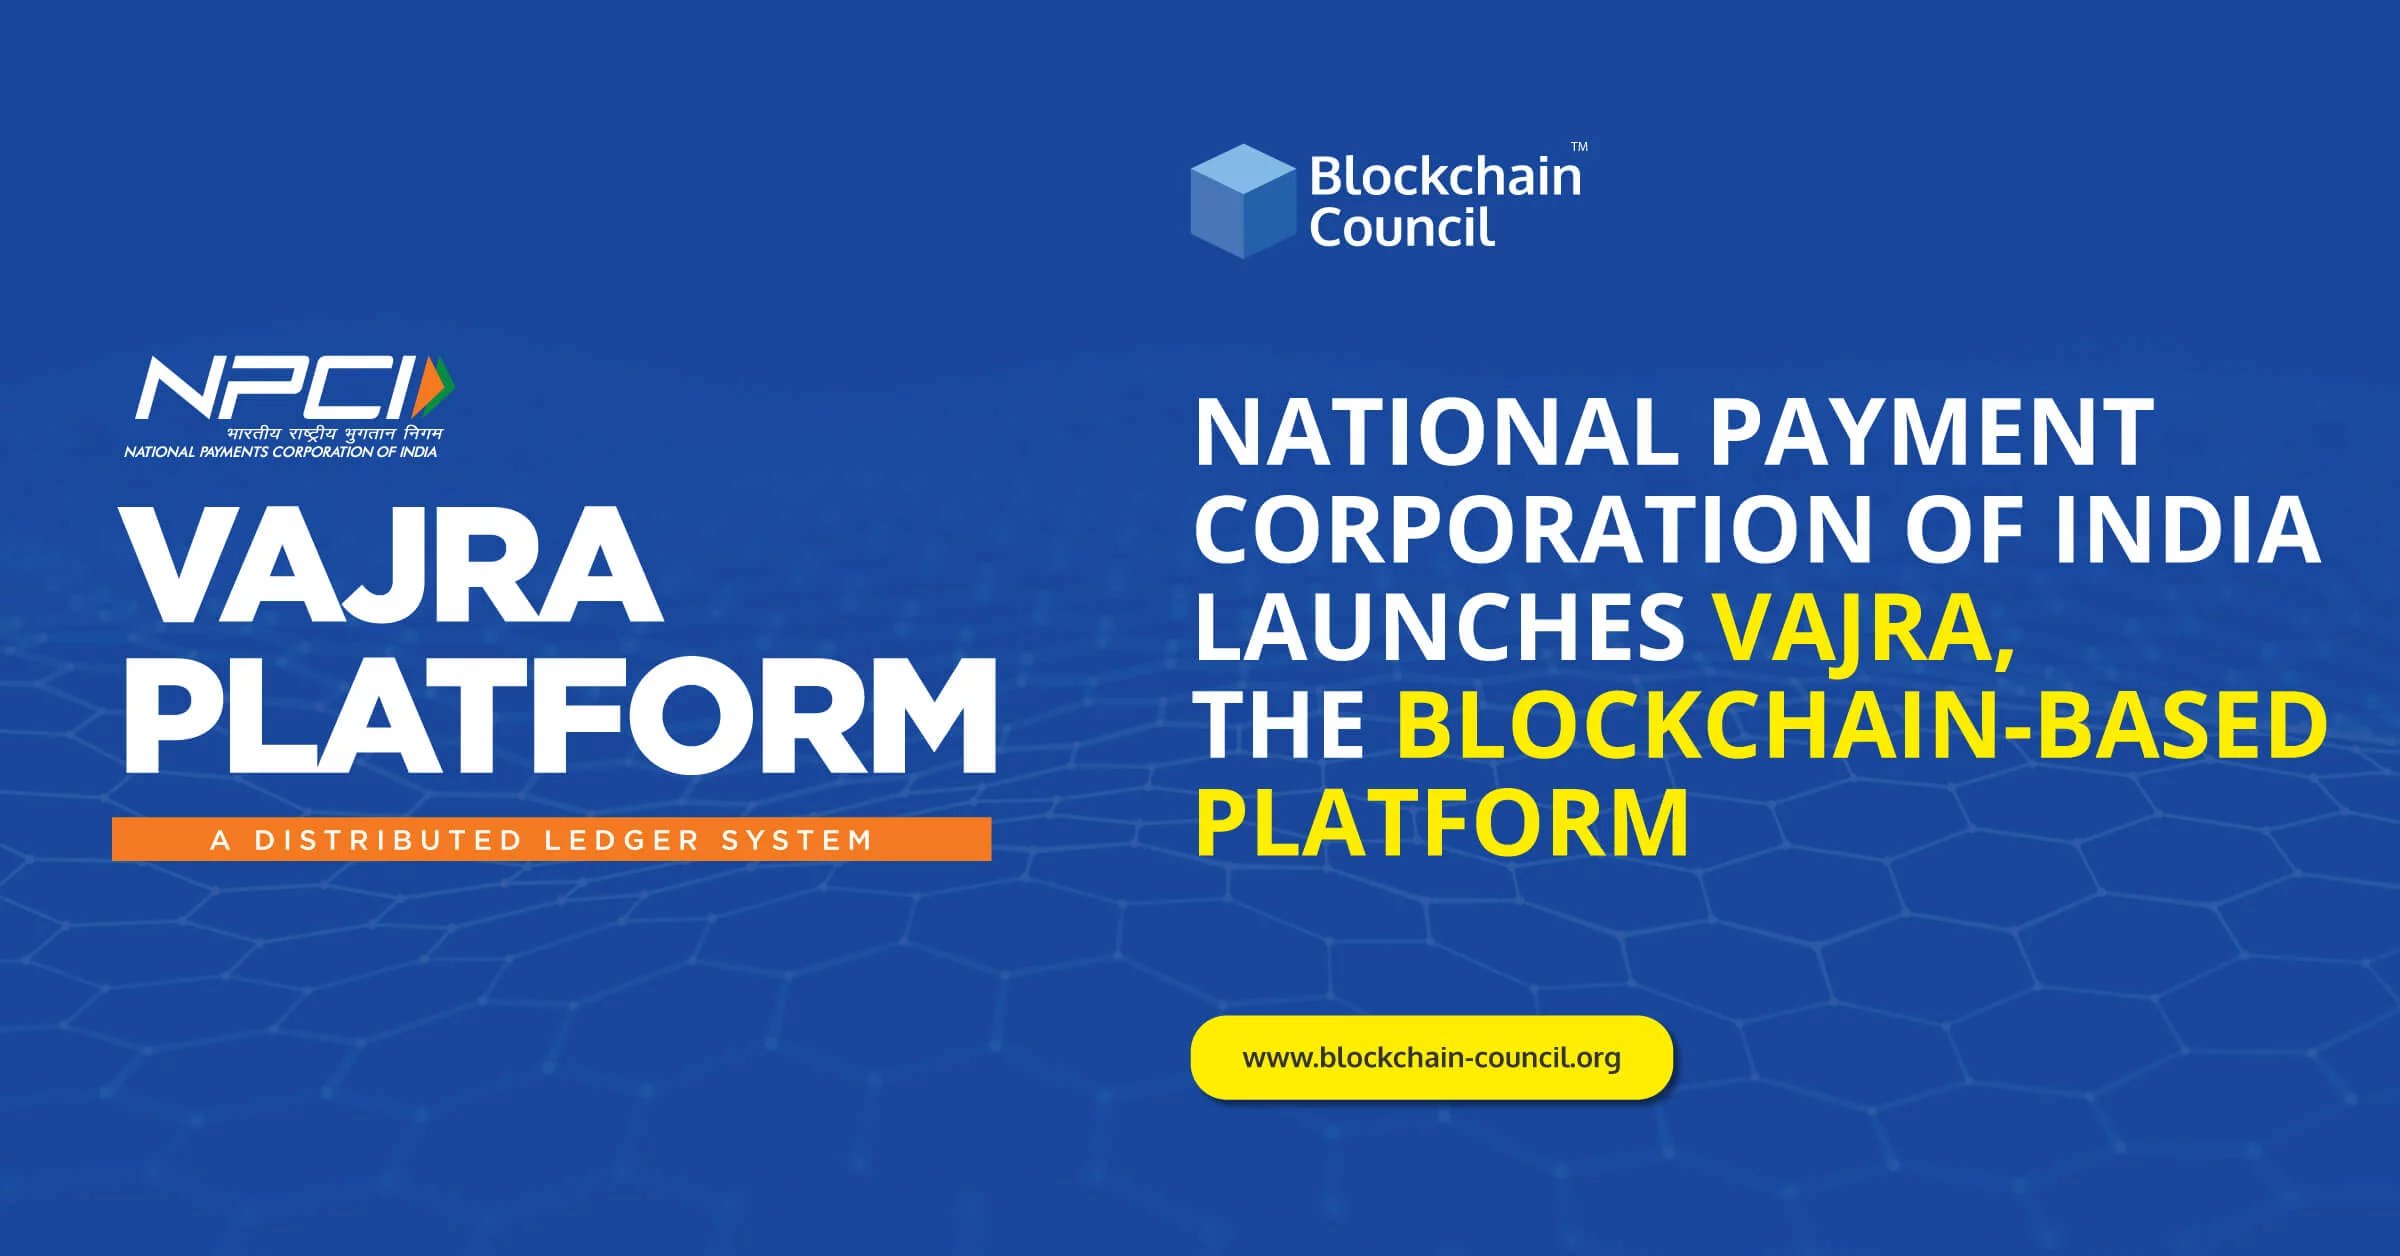 National-Payment-Corporation-of-India-Launches-Varja,-the-Blockchain-Based-Platform